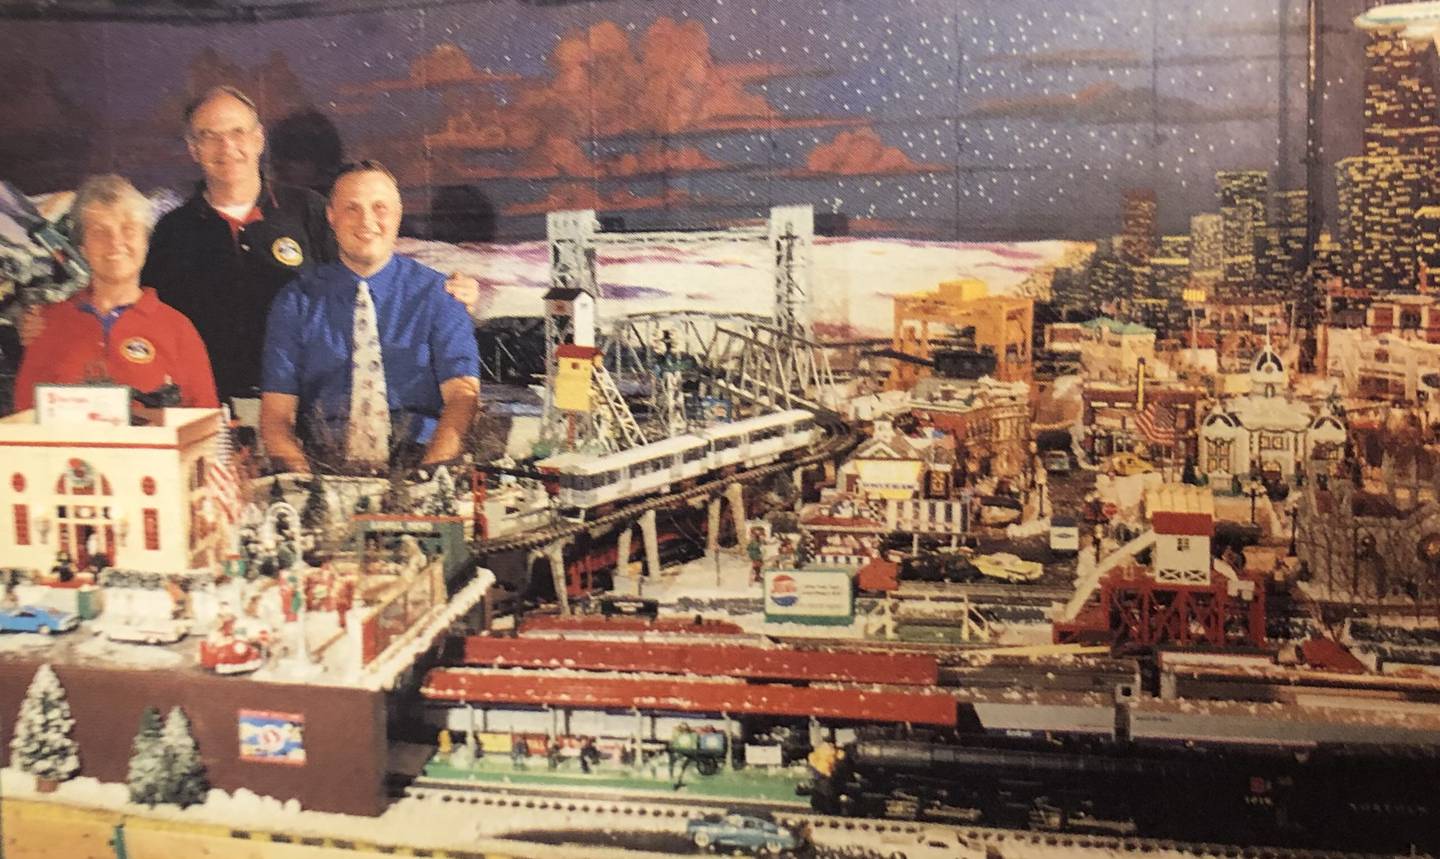 Wally Werderich with his parents Anita and George A. Werderich featured in Classic Toy Trains magazine's December 2003 edition.